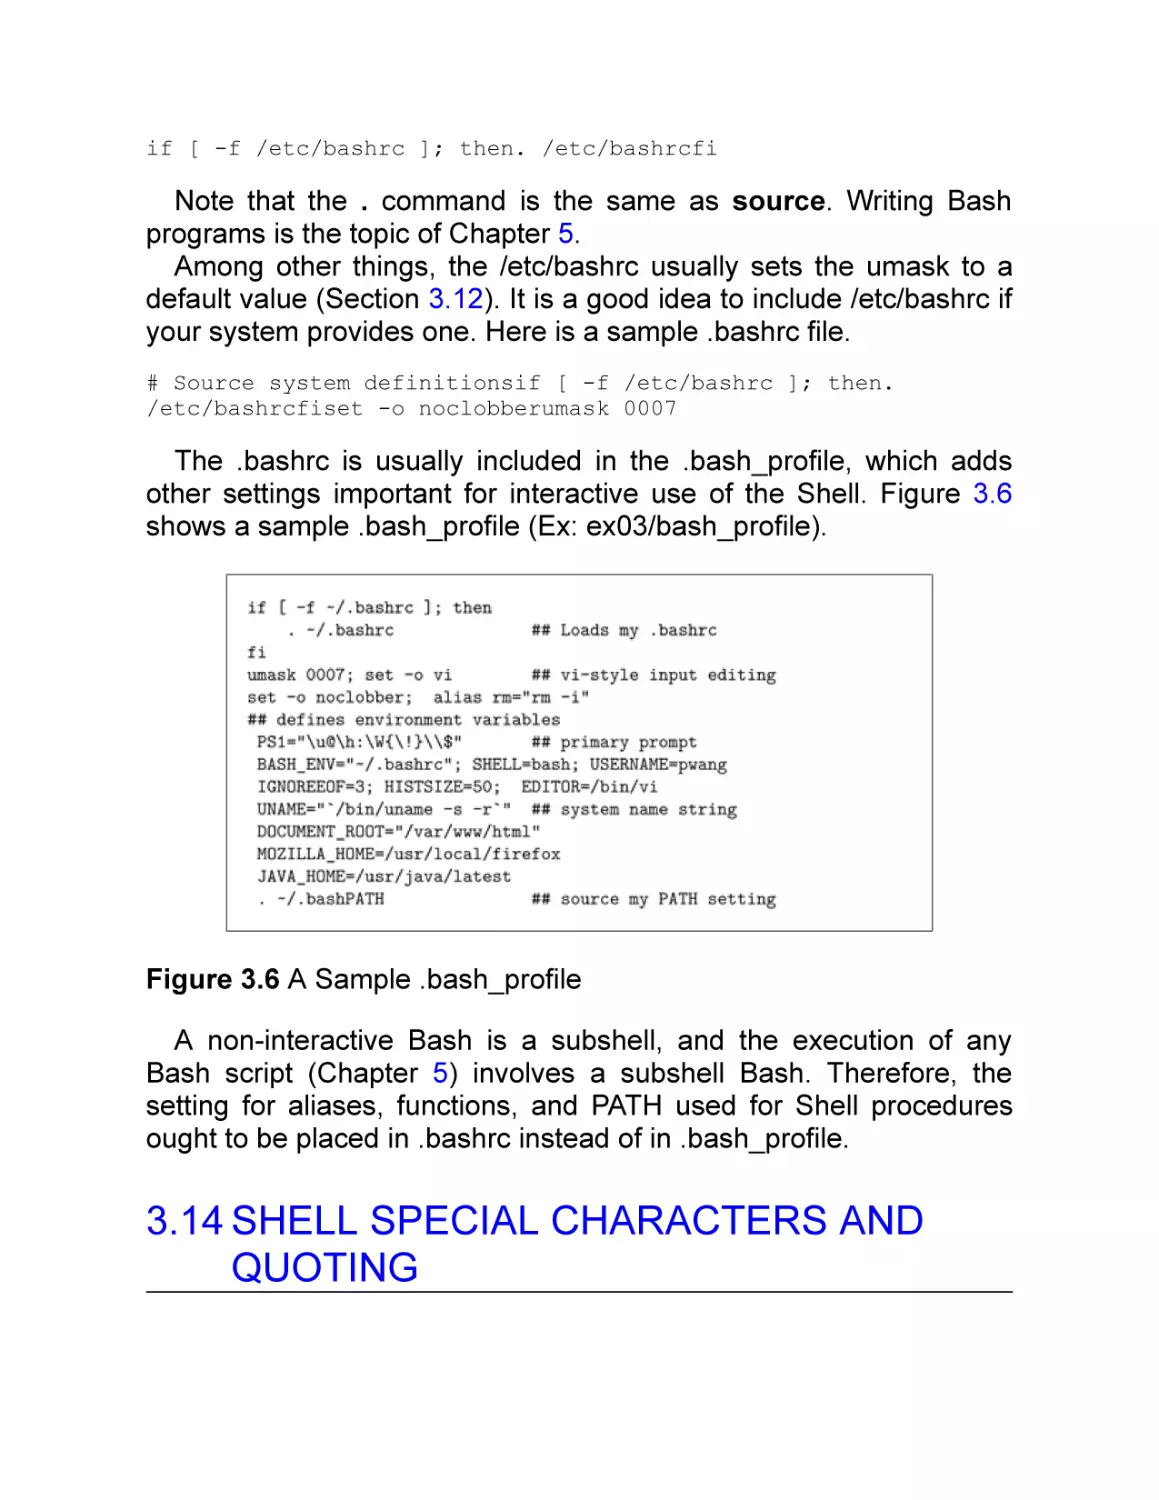 3.14 Shell Special Characters and Quoting